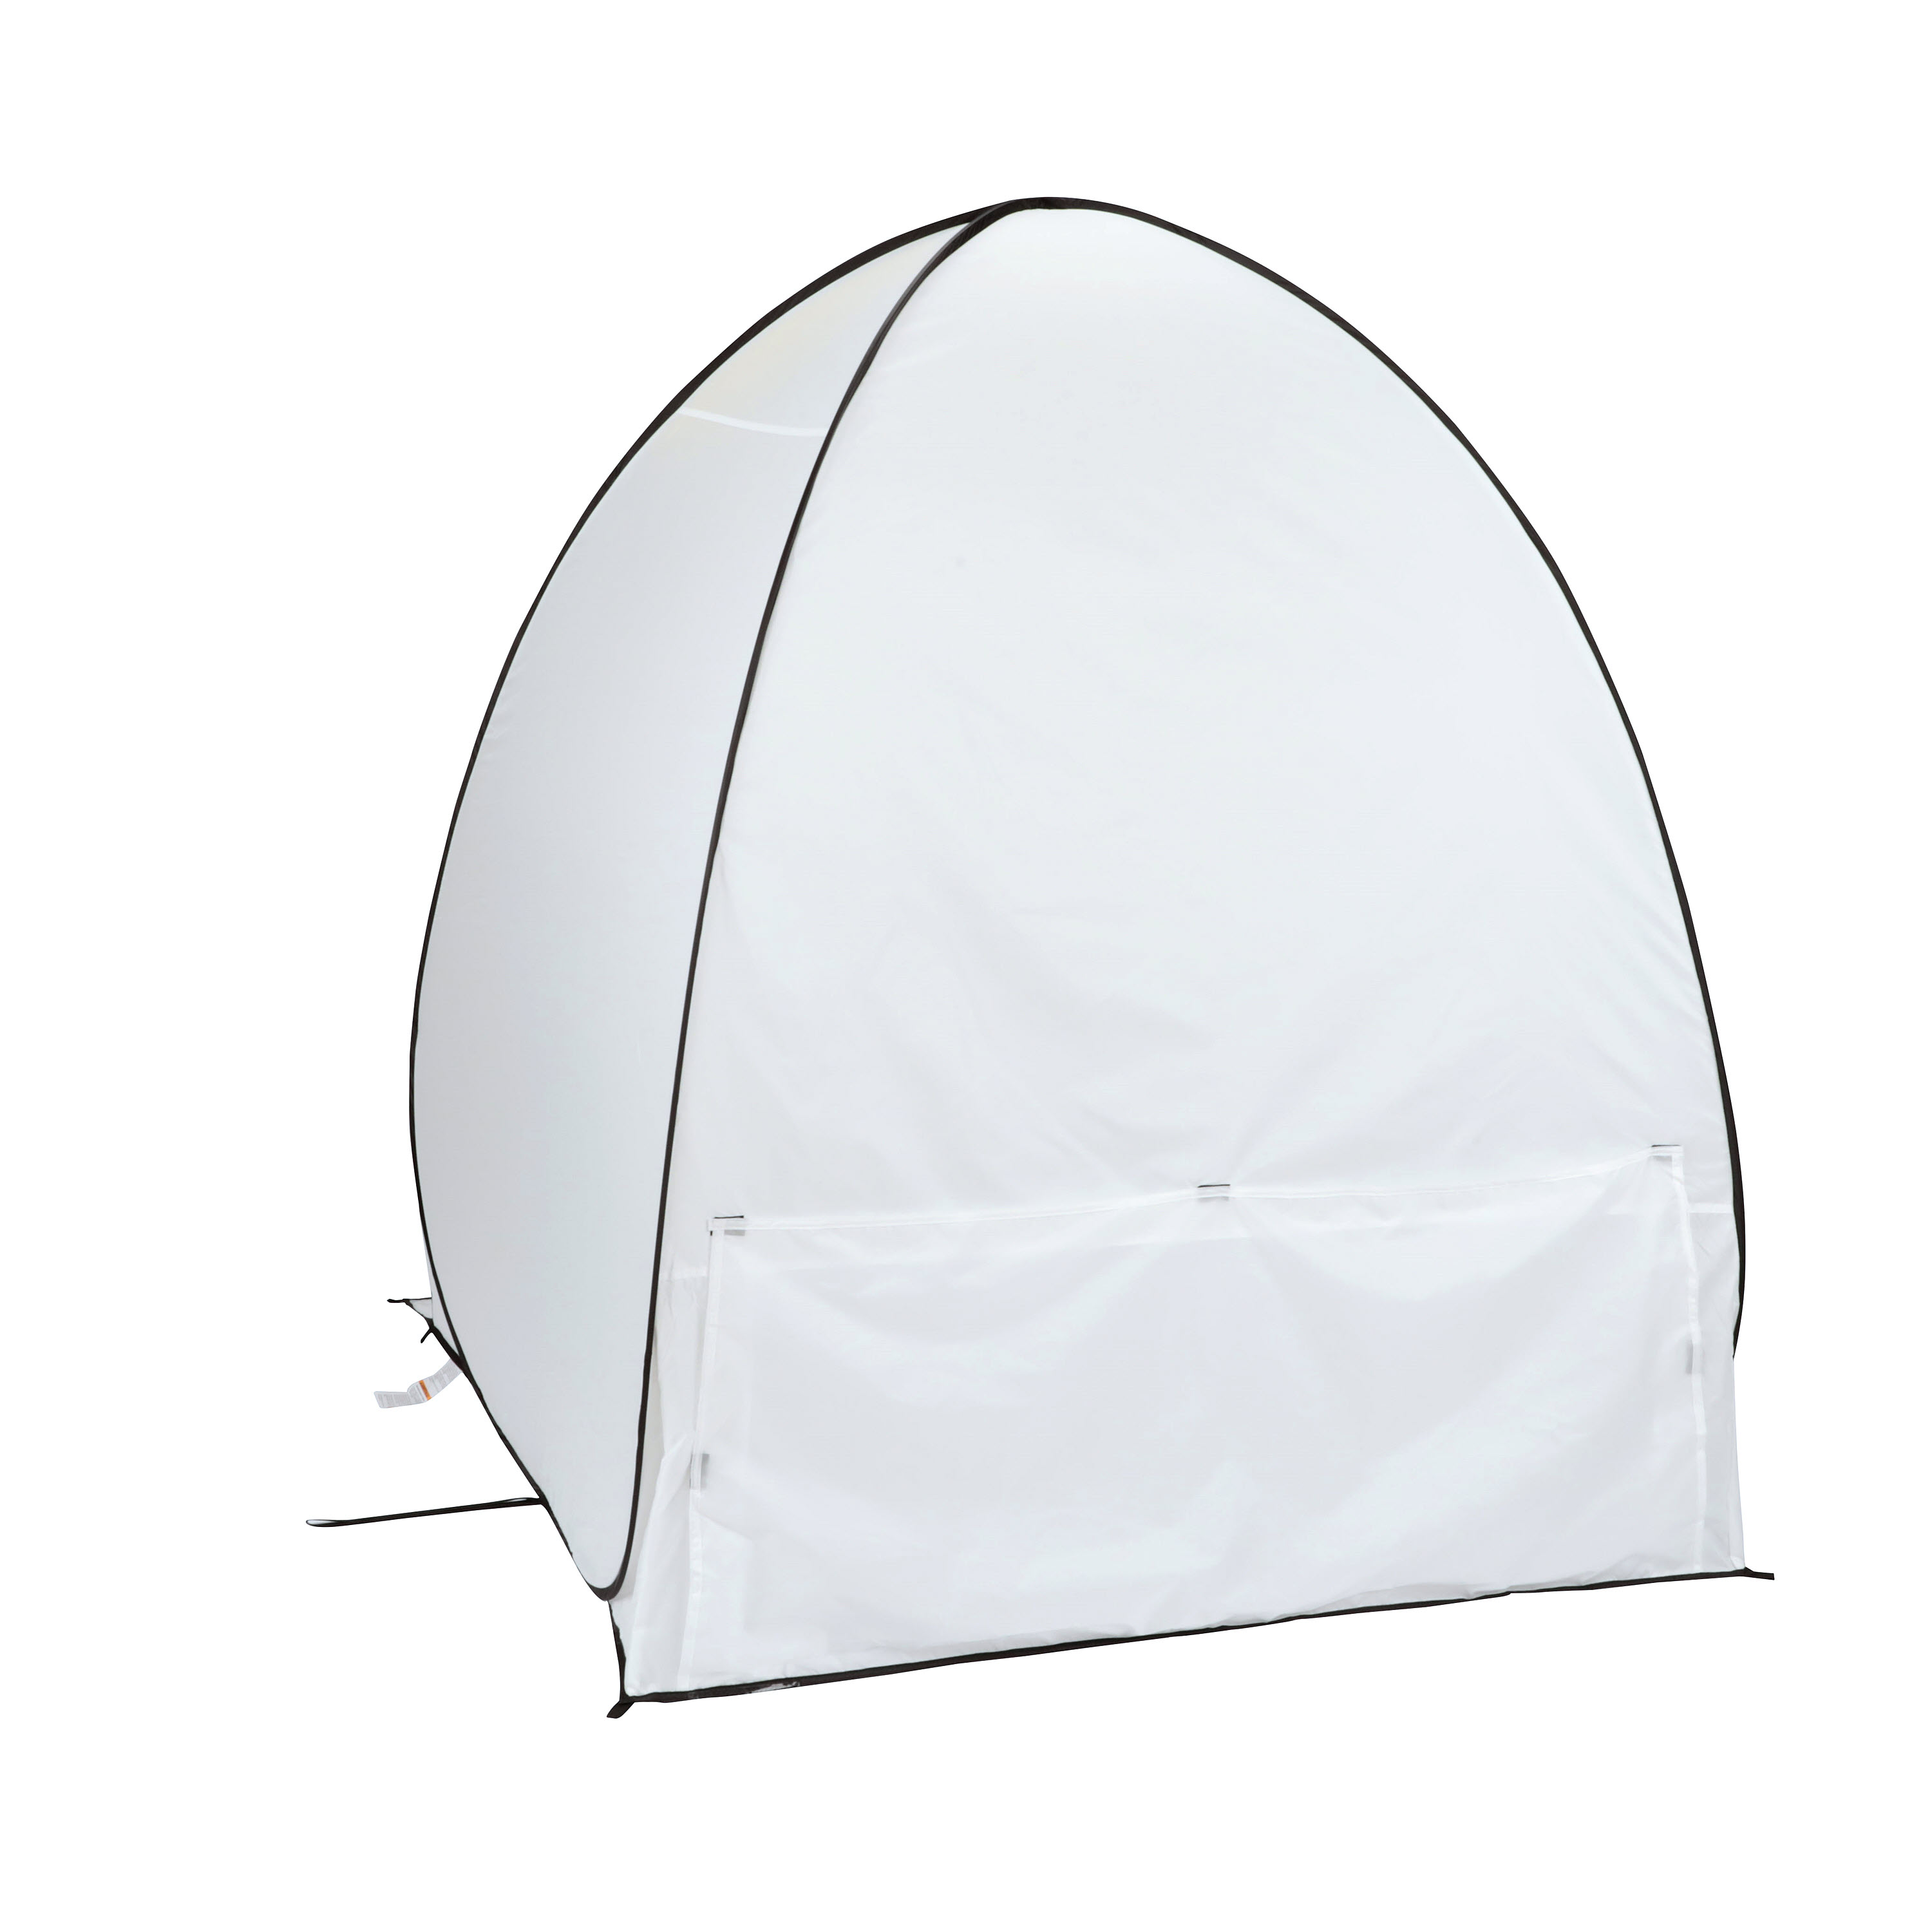 Wagner Spraytech C900051 HomeRight Small Spray Shelter Tent Portable For  DIY Spray Painting, Hobby Paint Booth Tool Painting Station